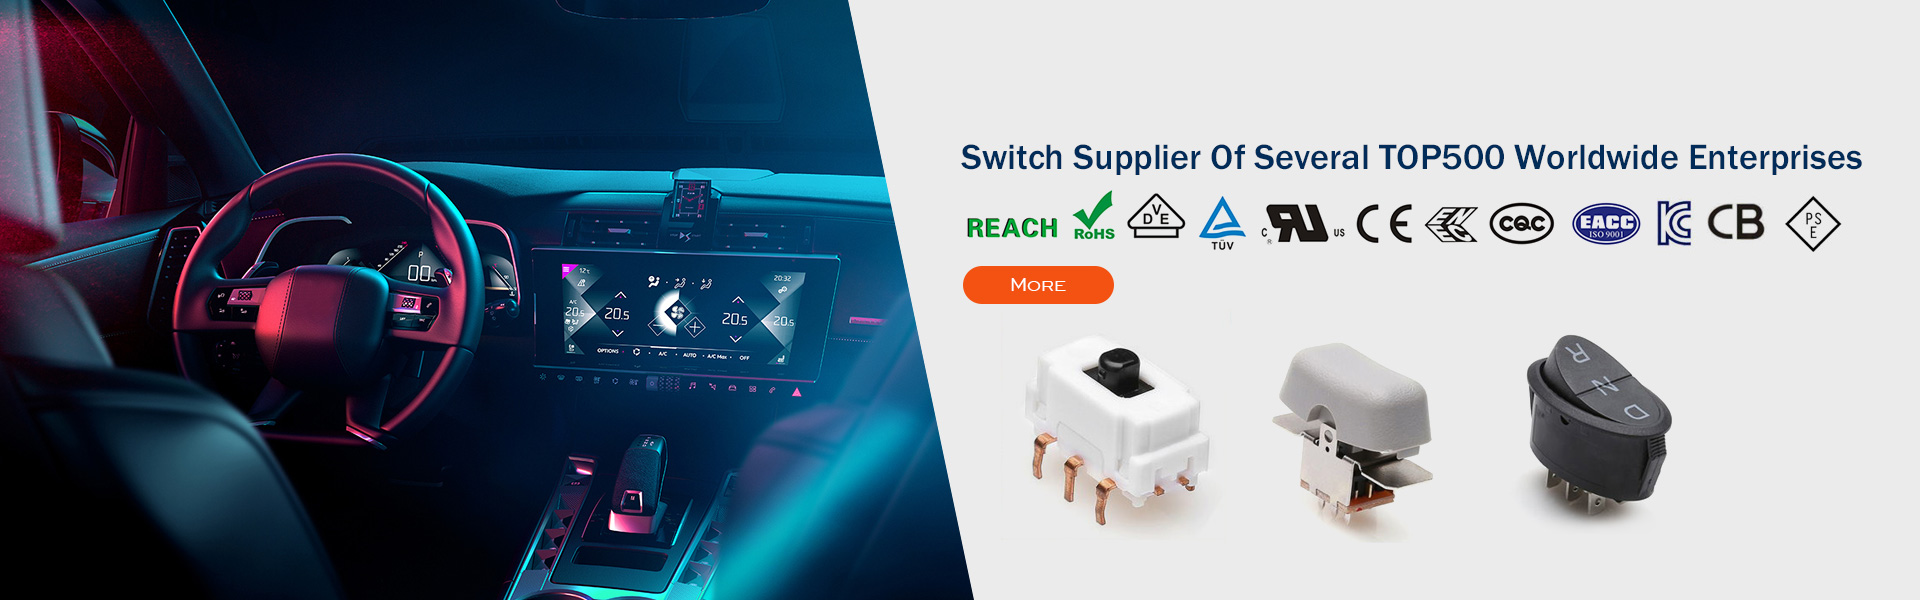 switch supplier of several Top500 worldwide enterprises